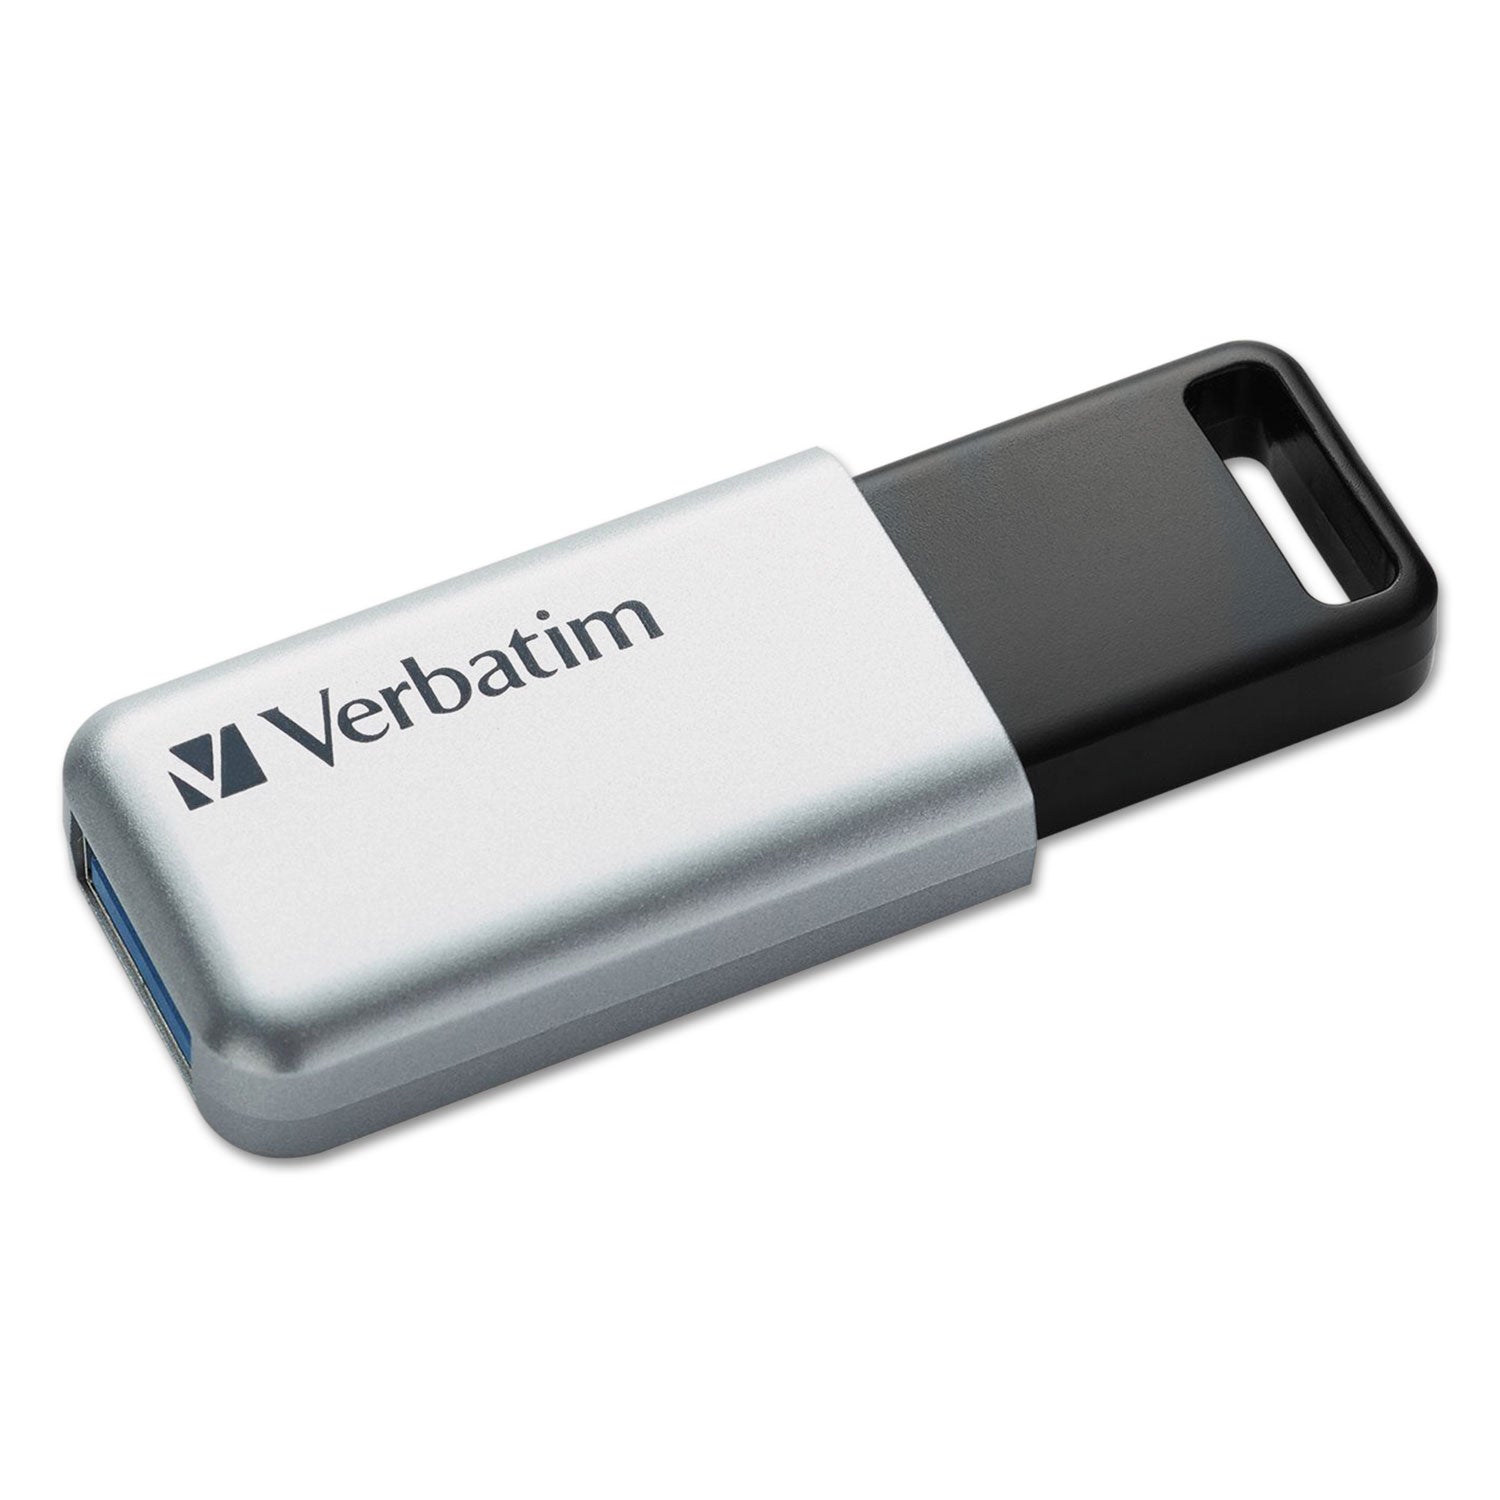 store-n-go-secure-pro-usb-flash-drive-with-aes-256-encryption-32-gb-silver_ver98665 - 2